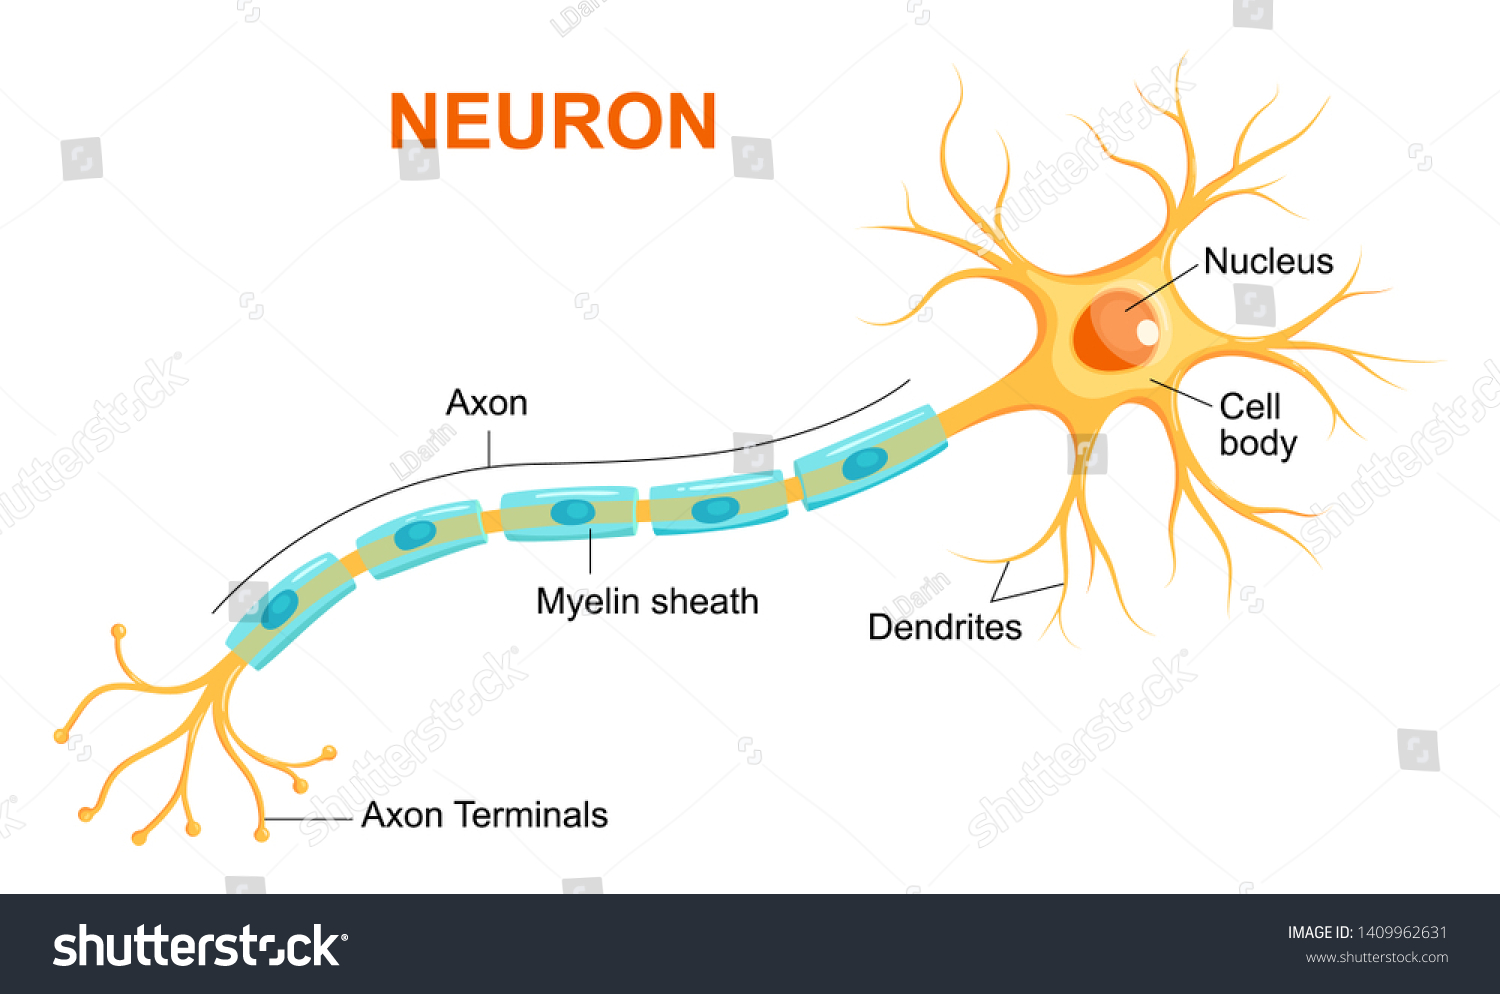 SVG of Vector infographic of neuron anatomy.   Axon, myelin sheat, dendrites, cell body, nucleus. svg